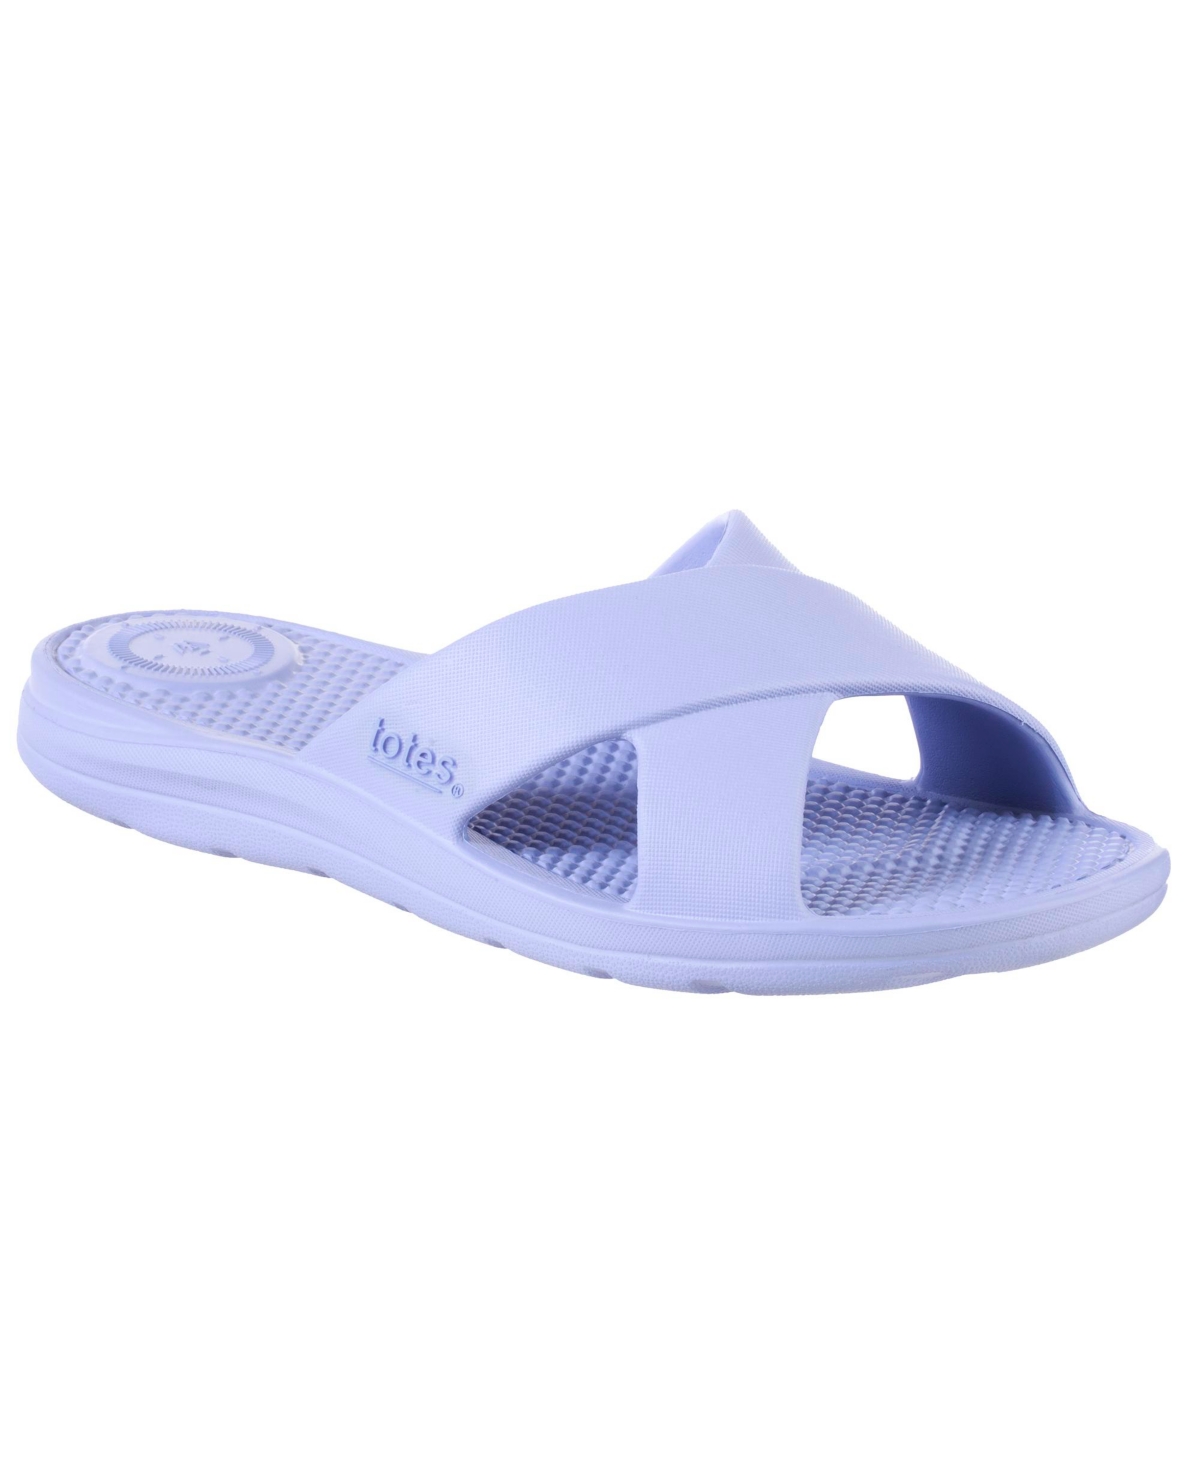 Totes Women's Molded Cross Slide Sandals With Everywear In Periwinkle